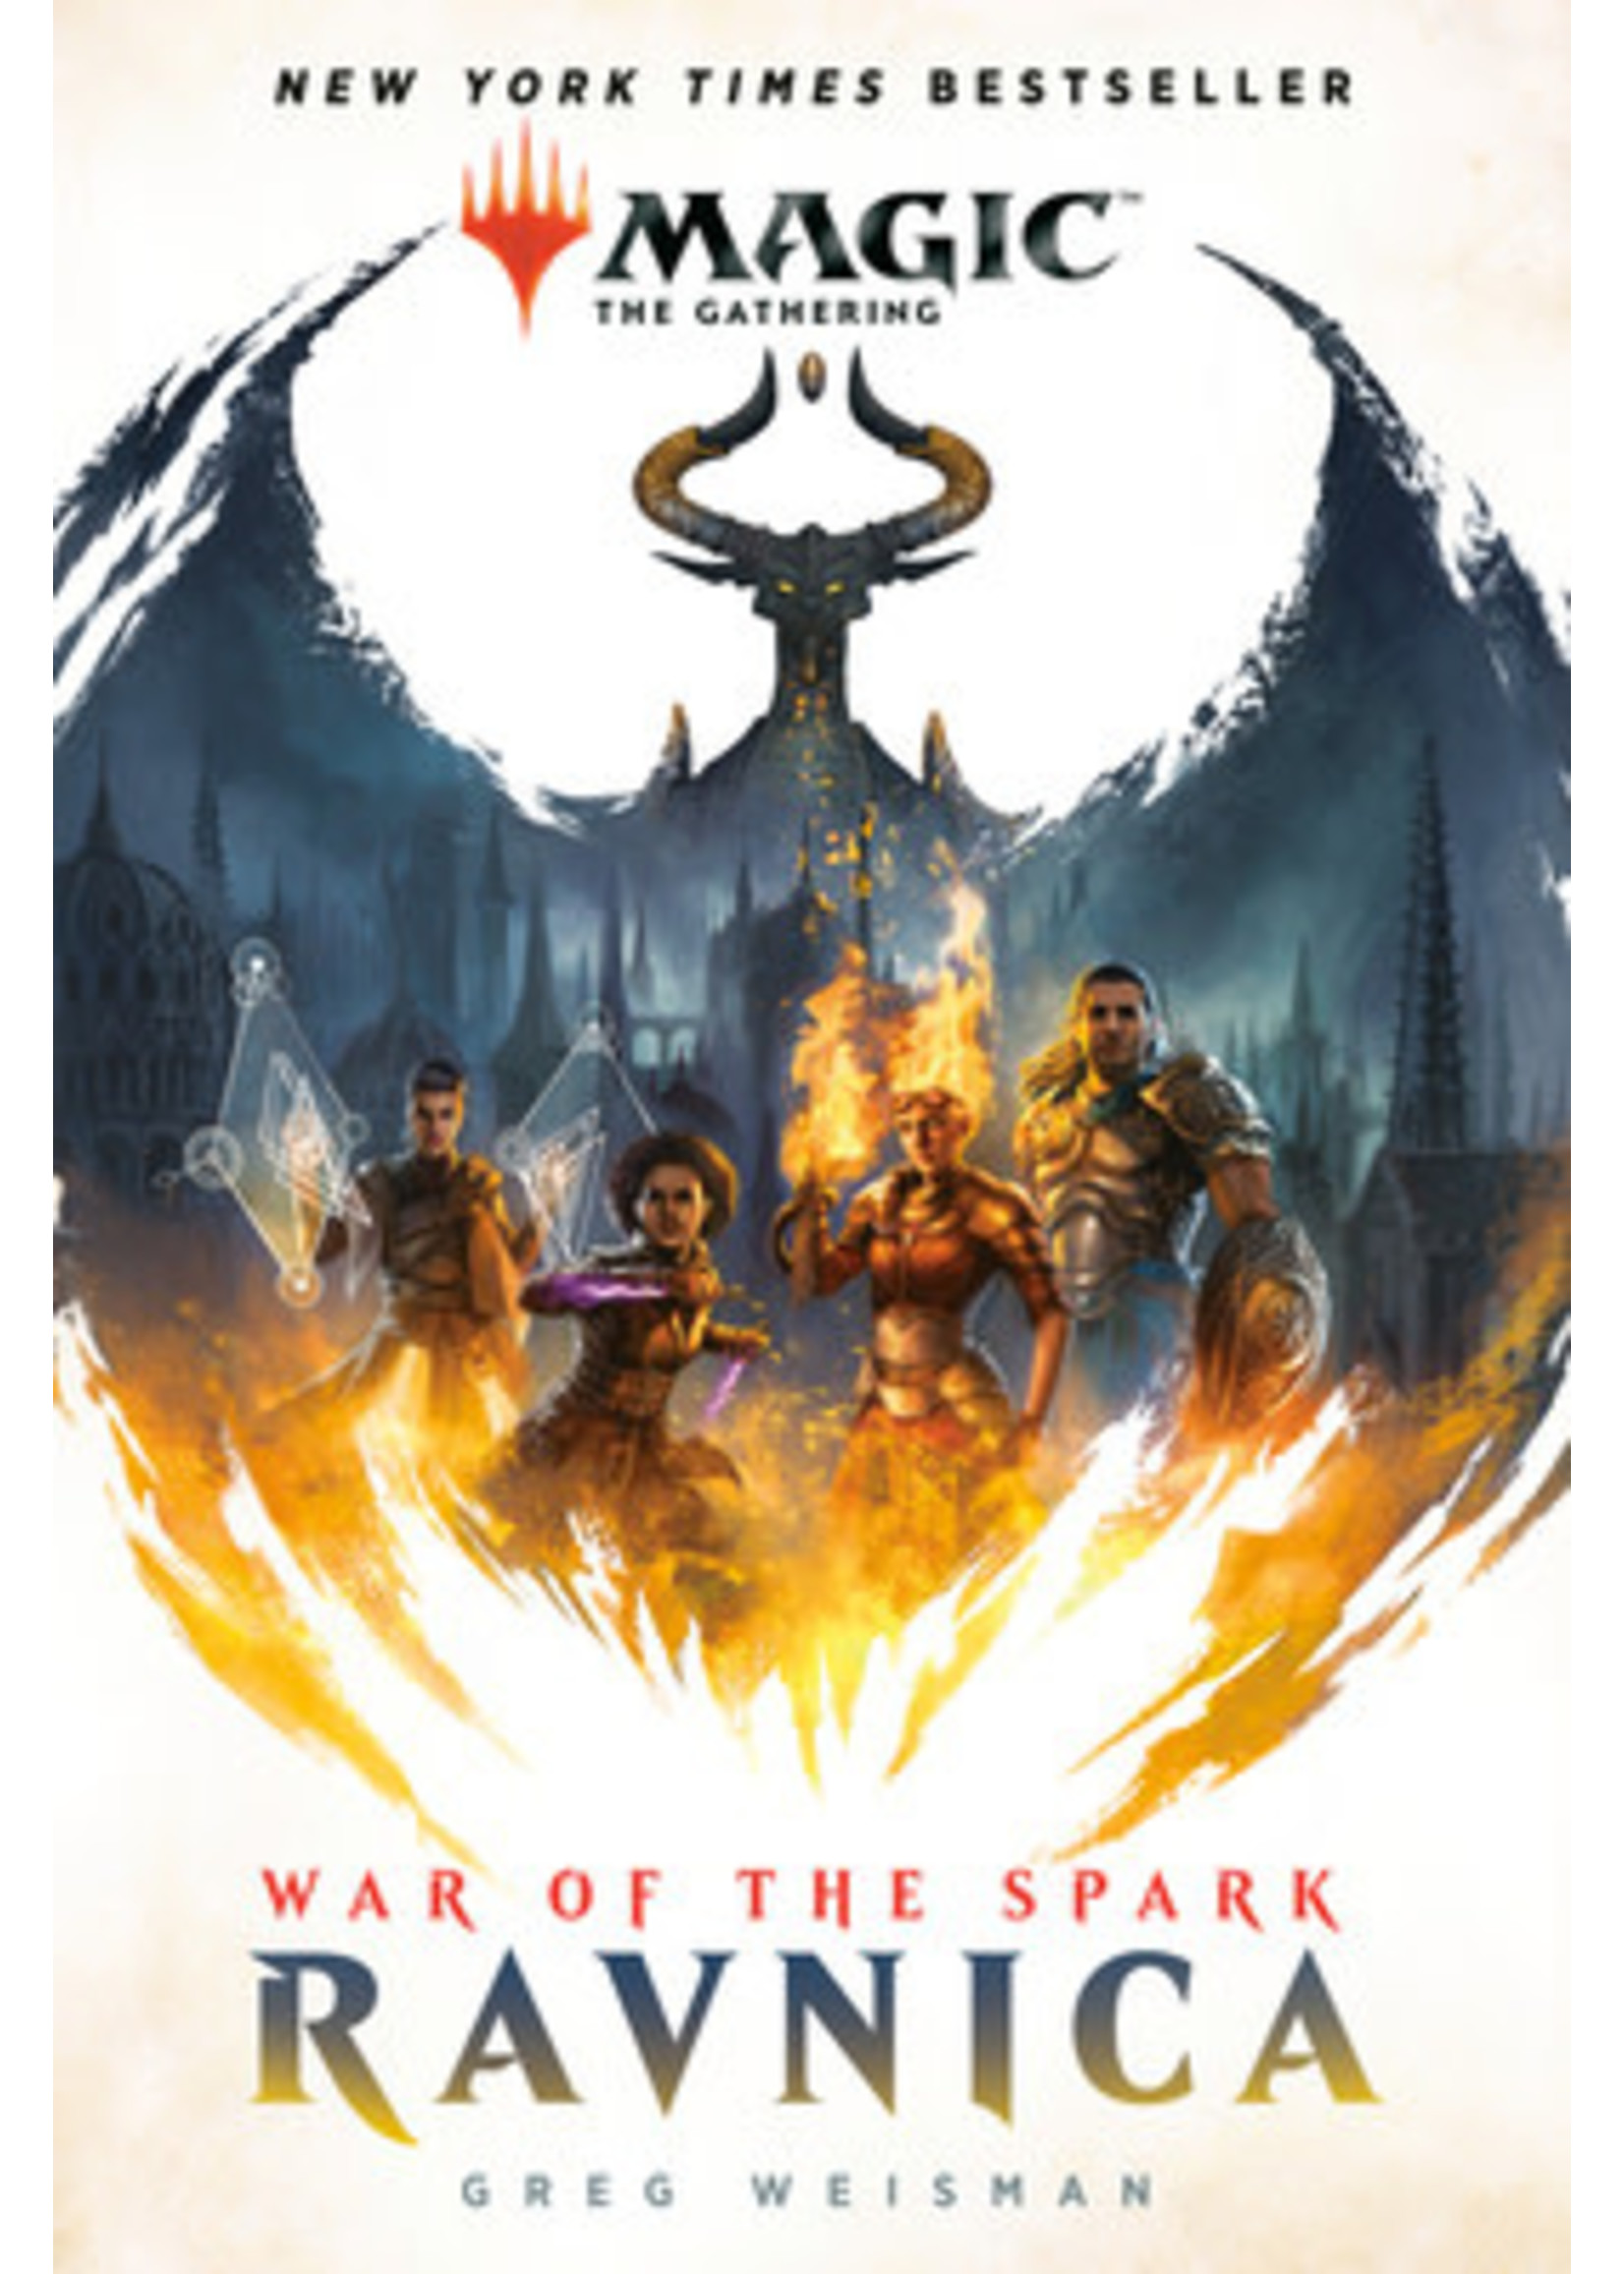 War of the Spark: Ravnica (Magic: The Gathering #73) by Greg Weisman